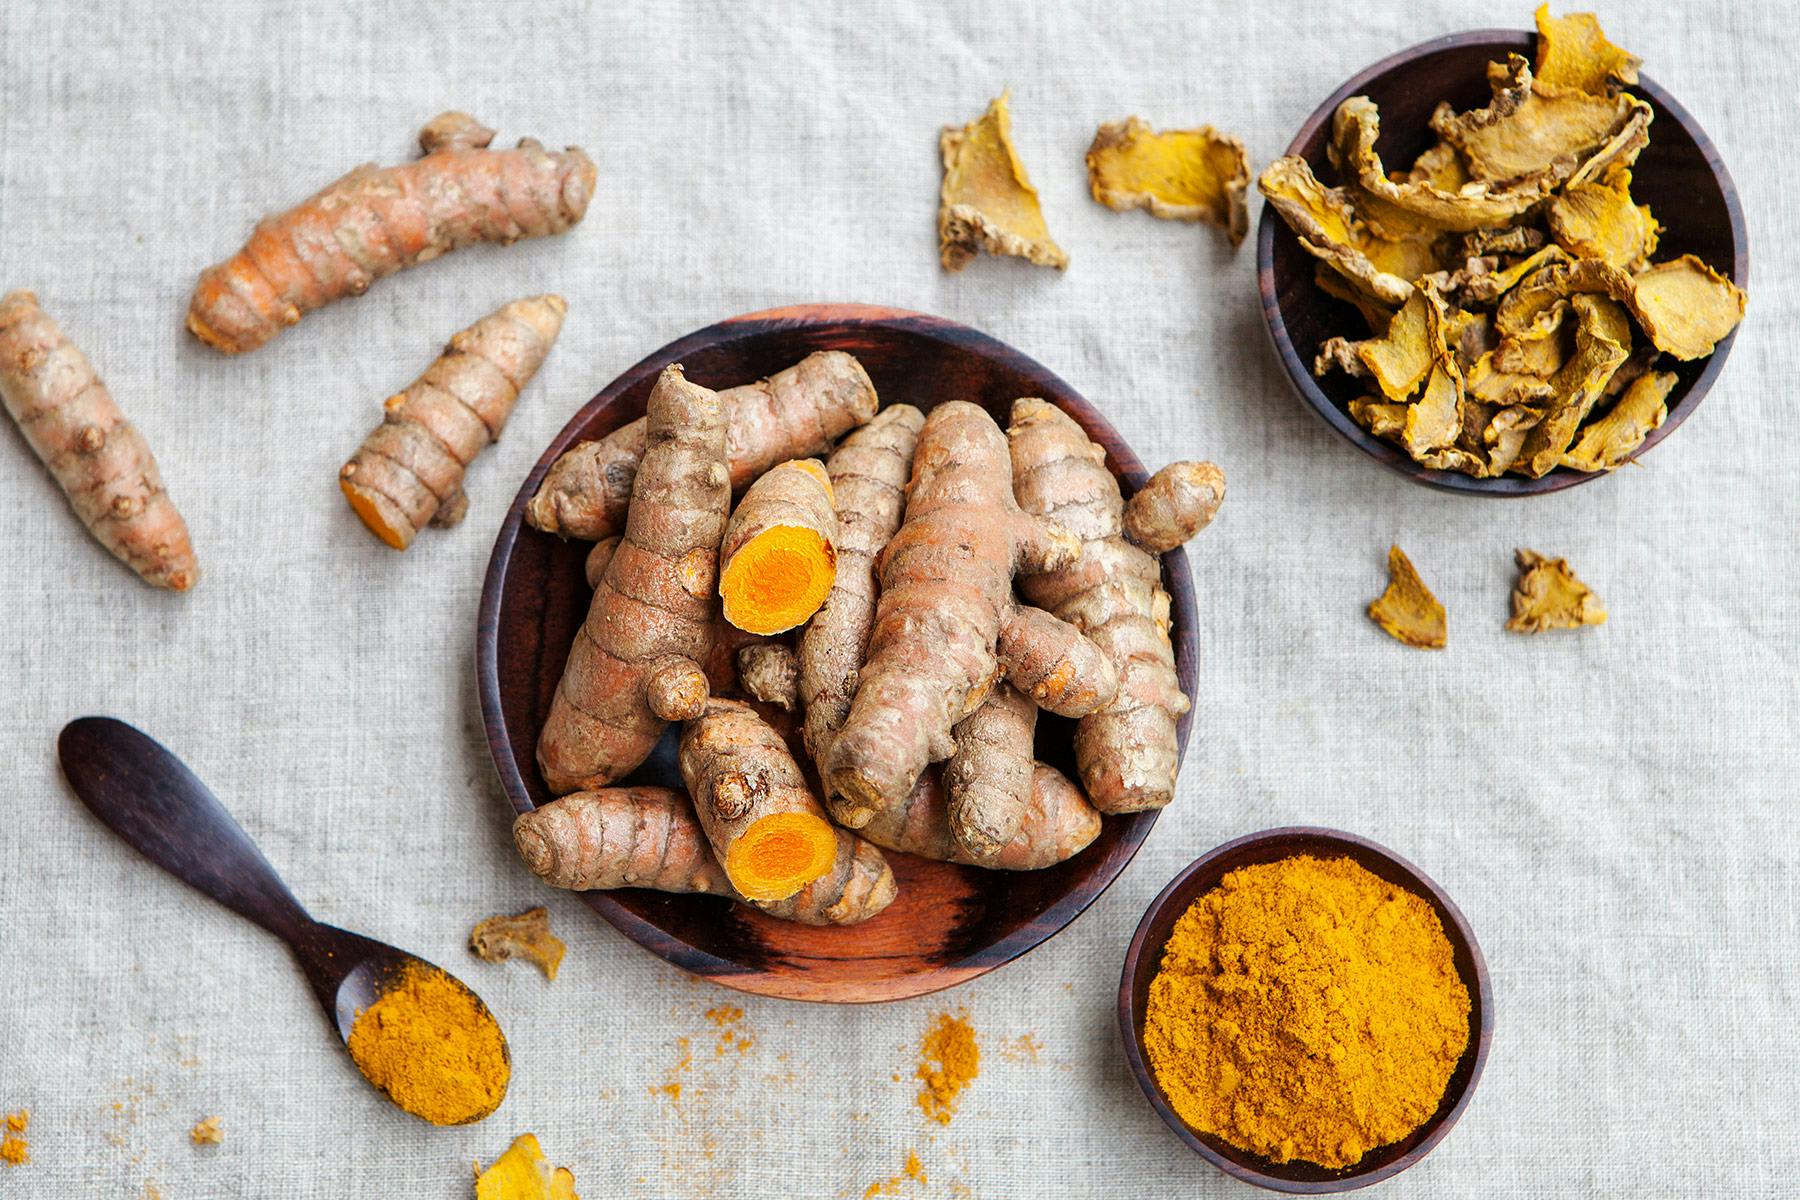 Turmeric root and powder (Trong Nghe, Creative Commons)